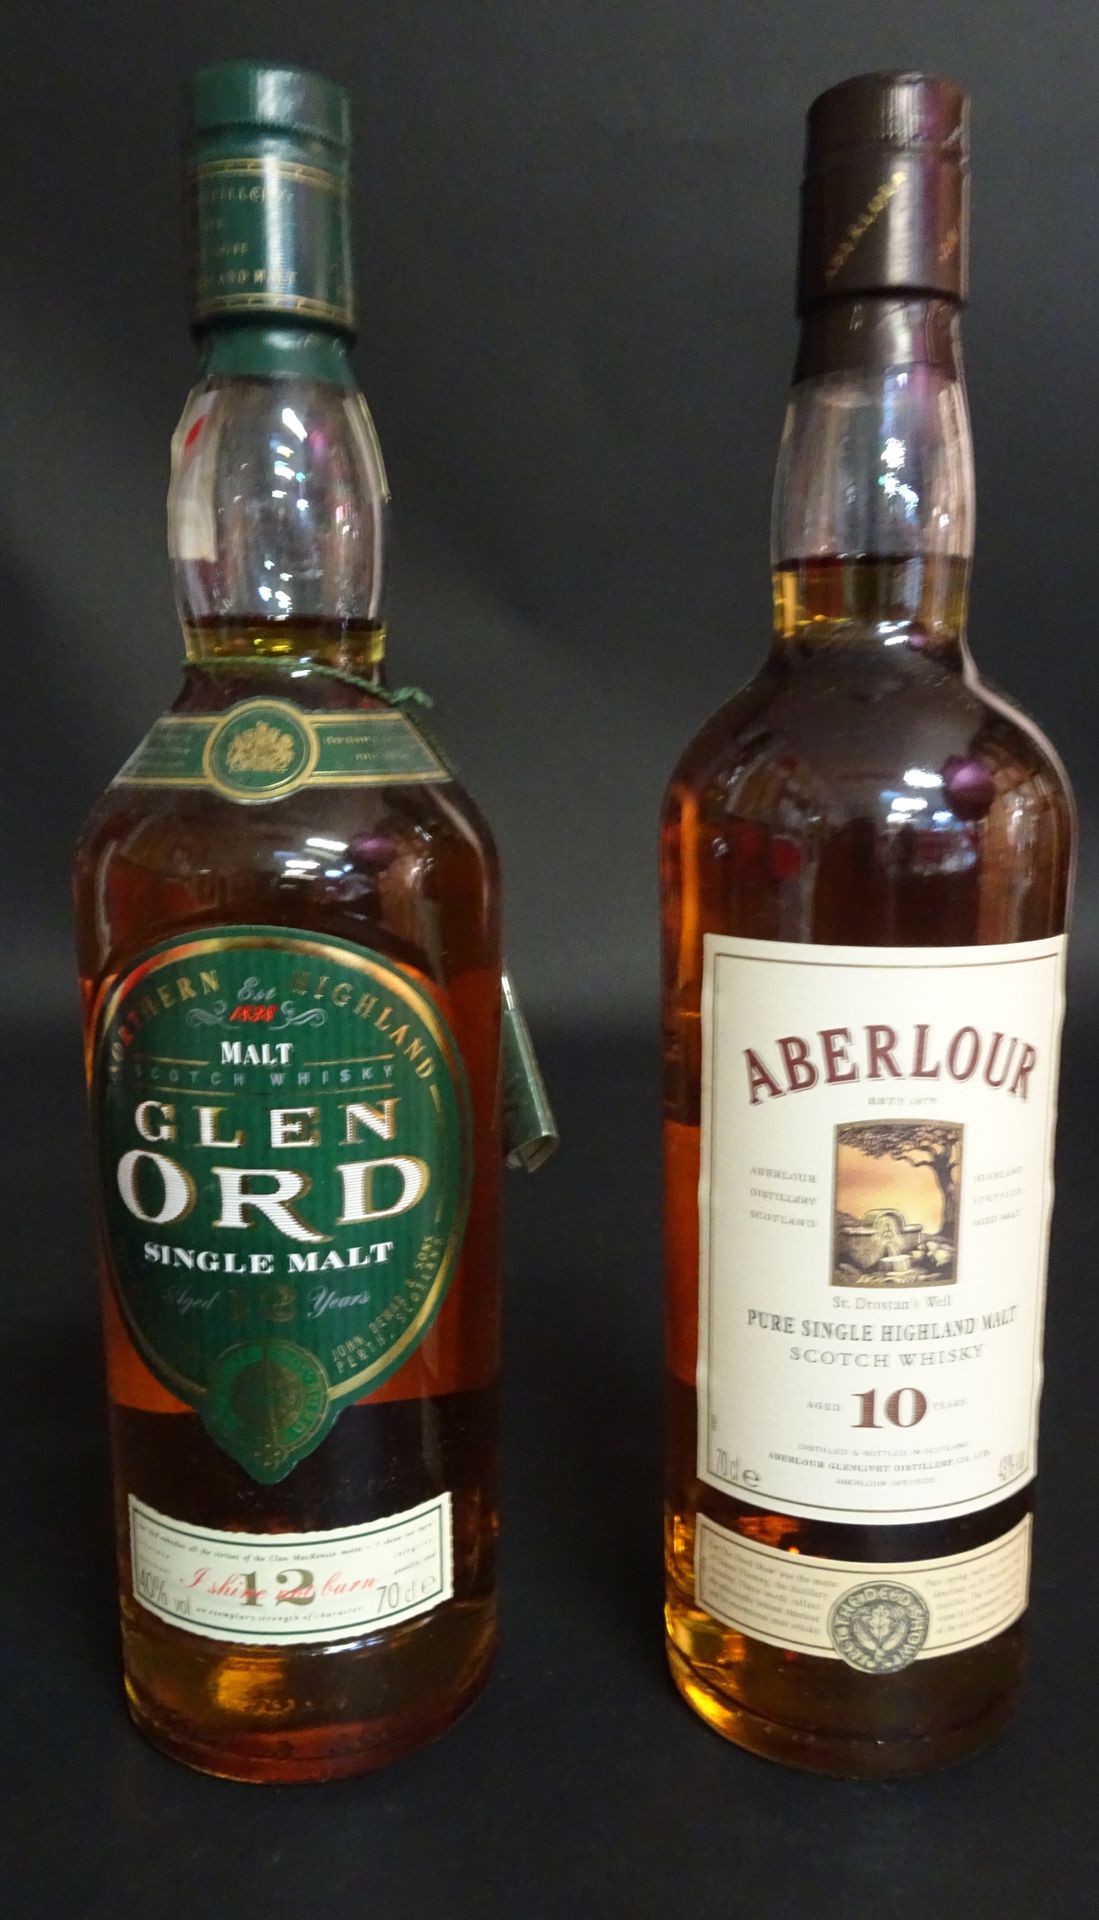 Null Glen Ord Whisky 12 ans

+ Aberlour Whisky 10 ans

2 bouteilles